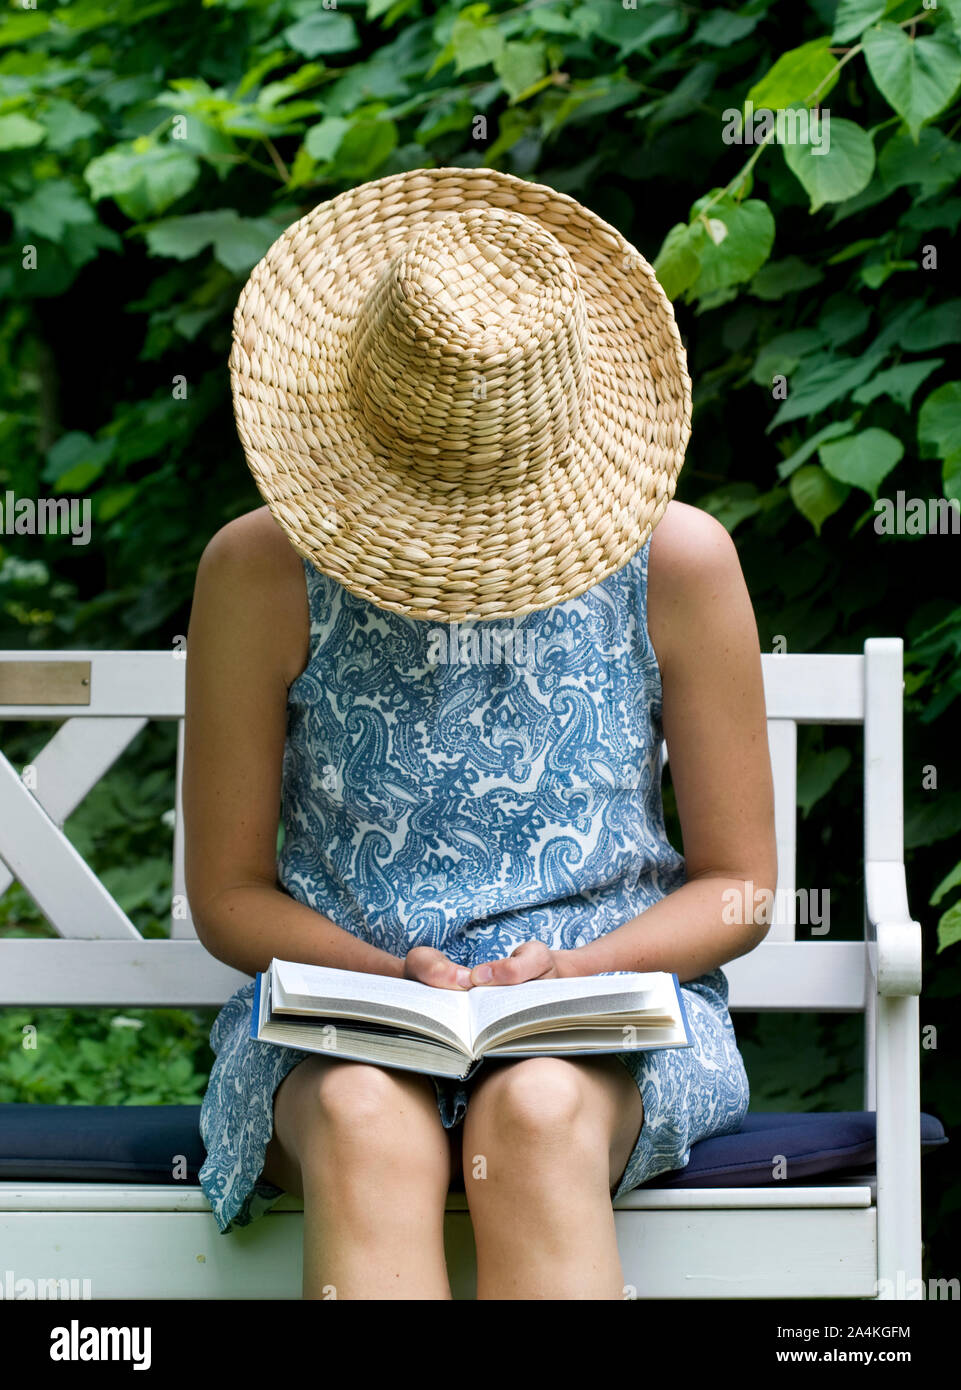 Woman on bench wearing straw hat Stock Photo